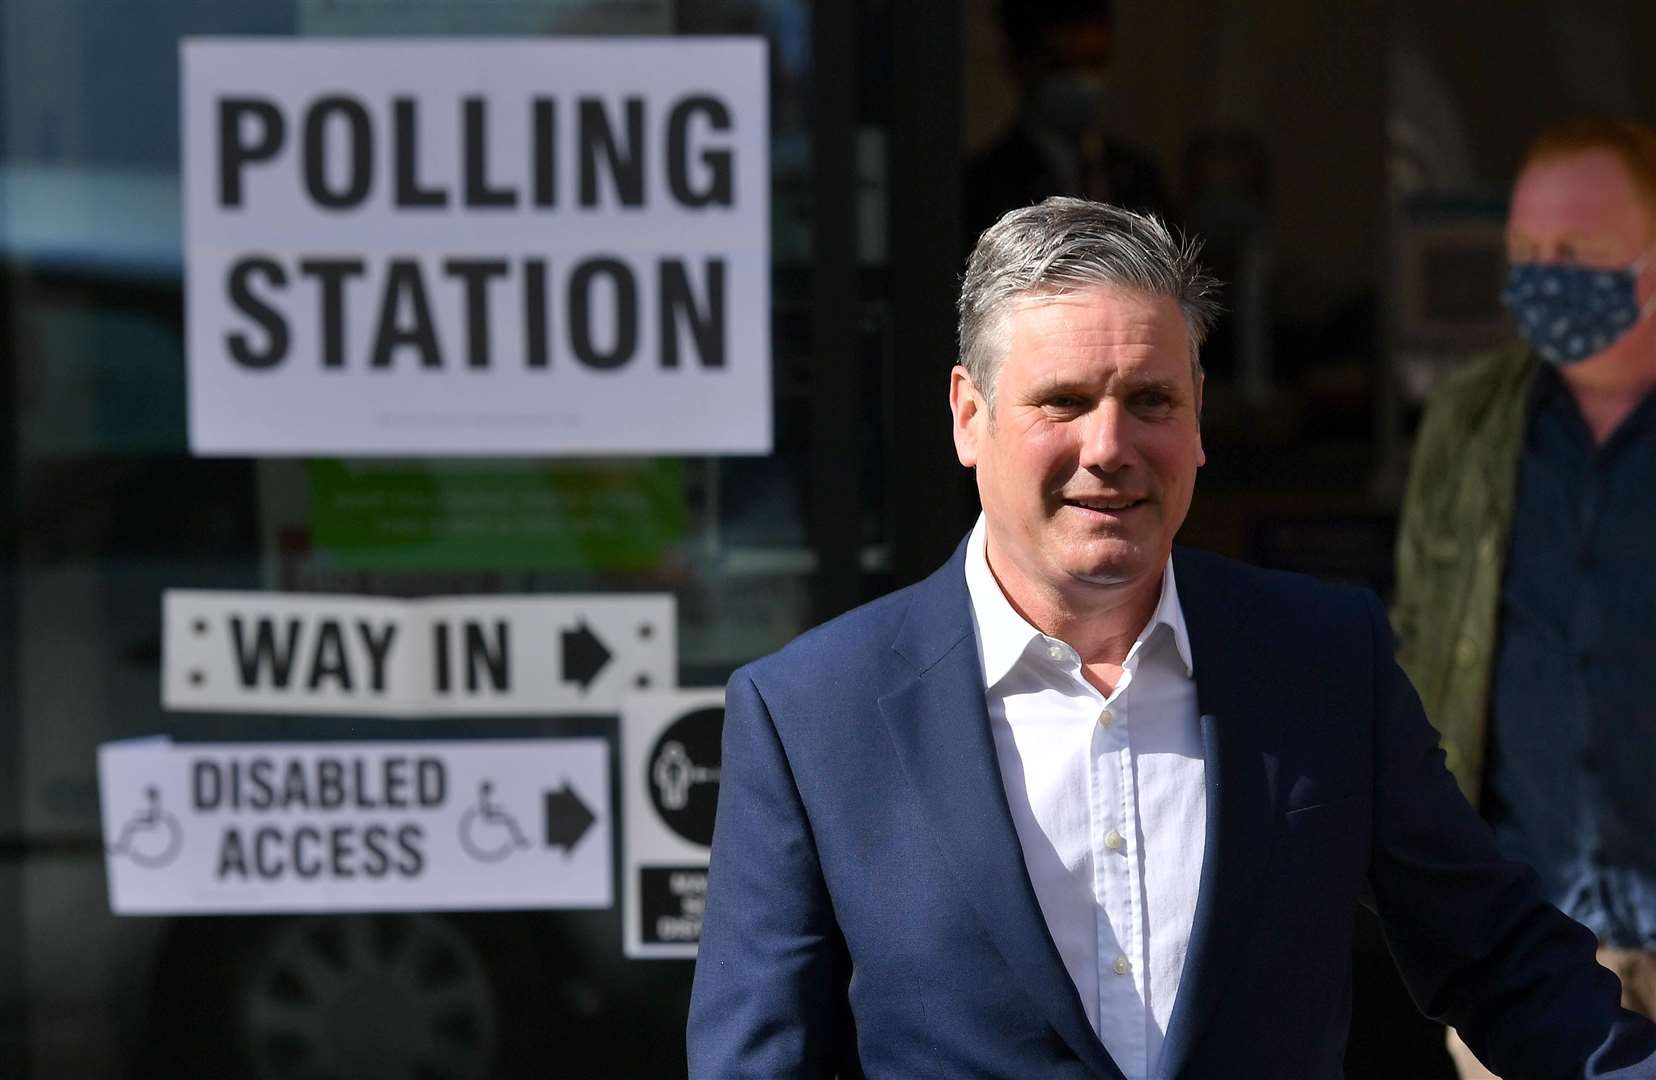 Labour leader Sir Keir Starmer on polling day (Dominic Lipinski/PA)